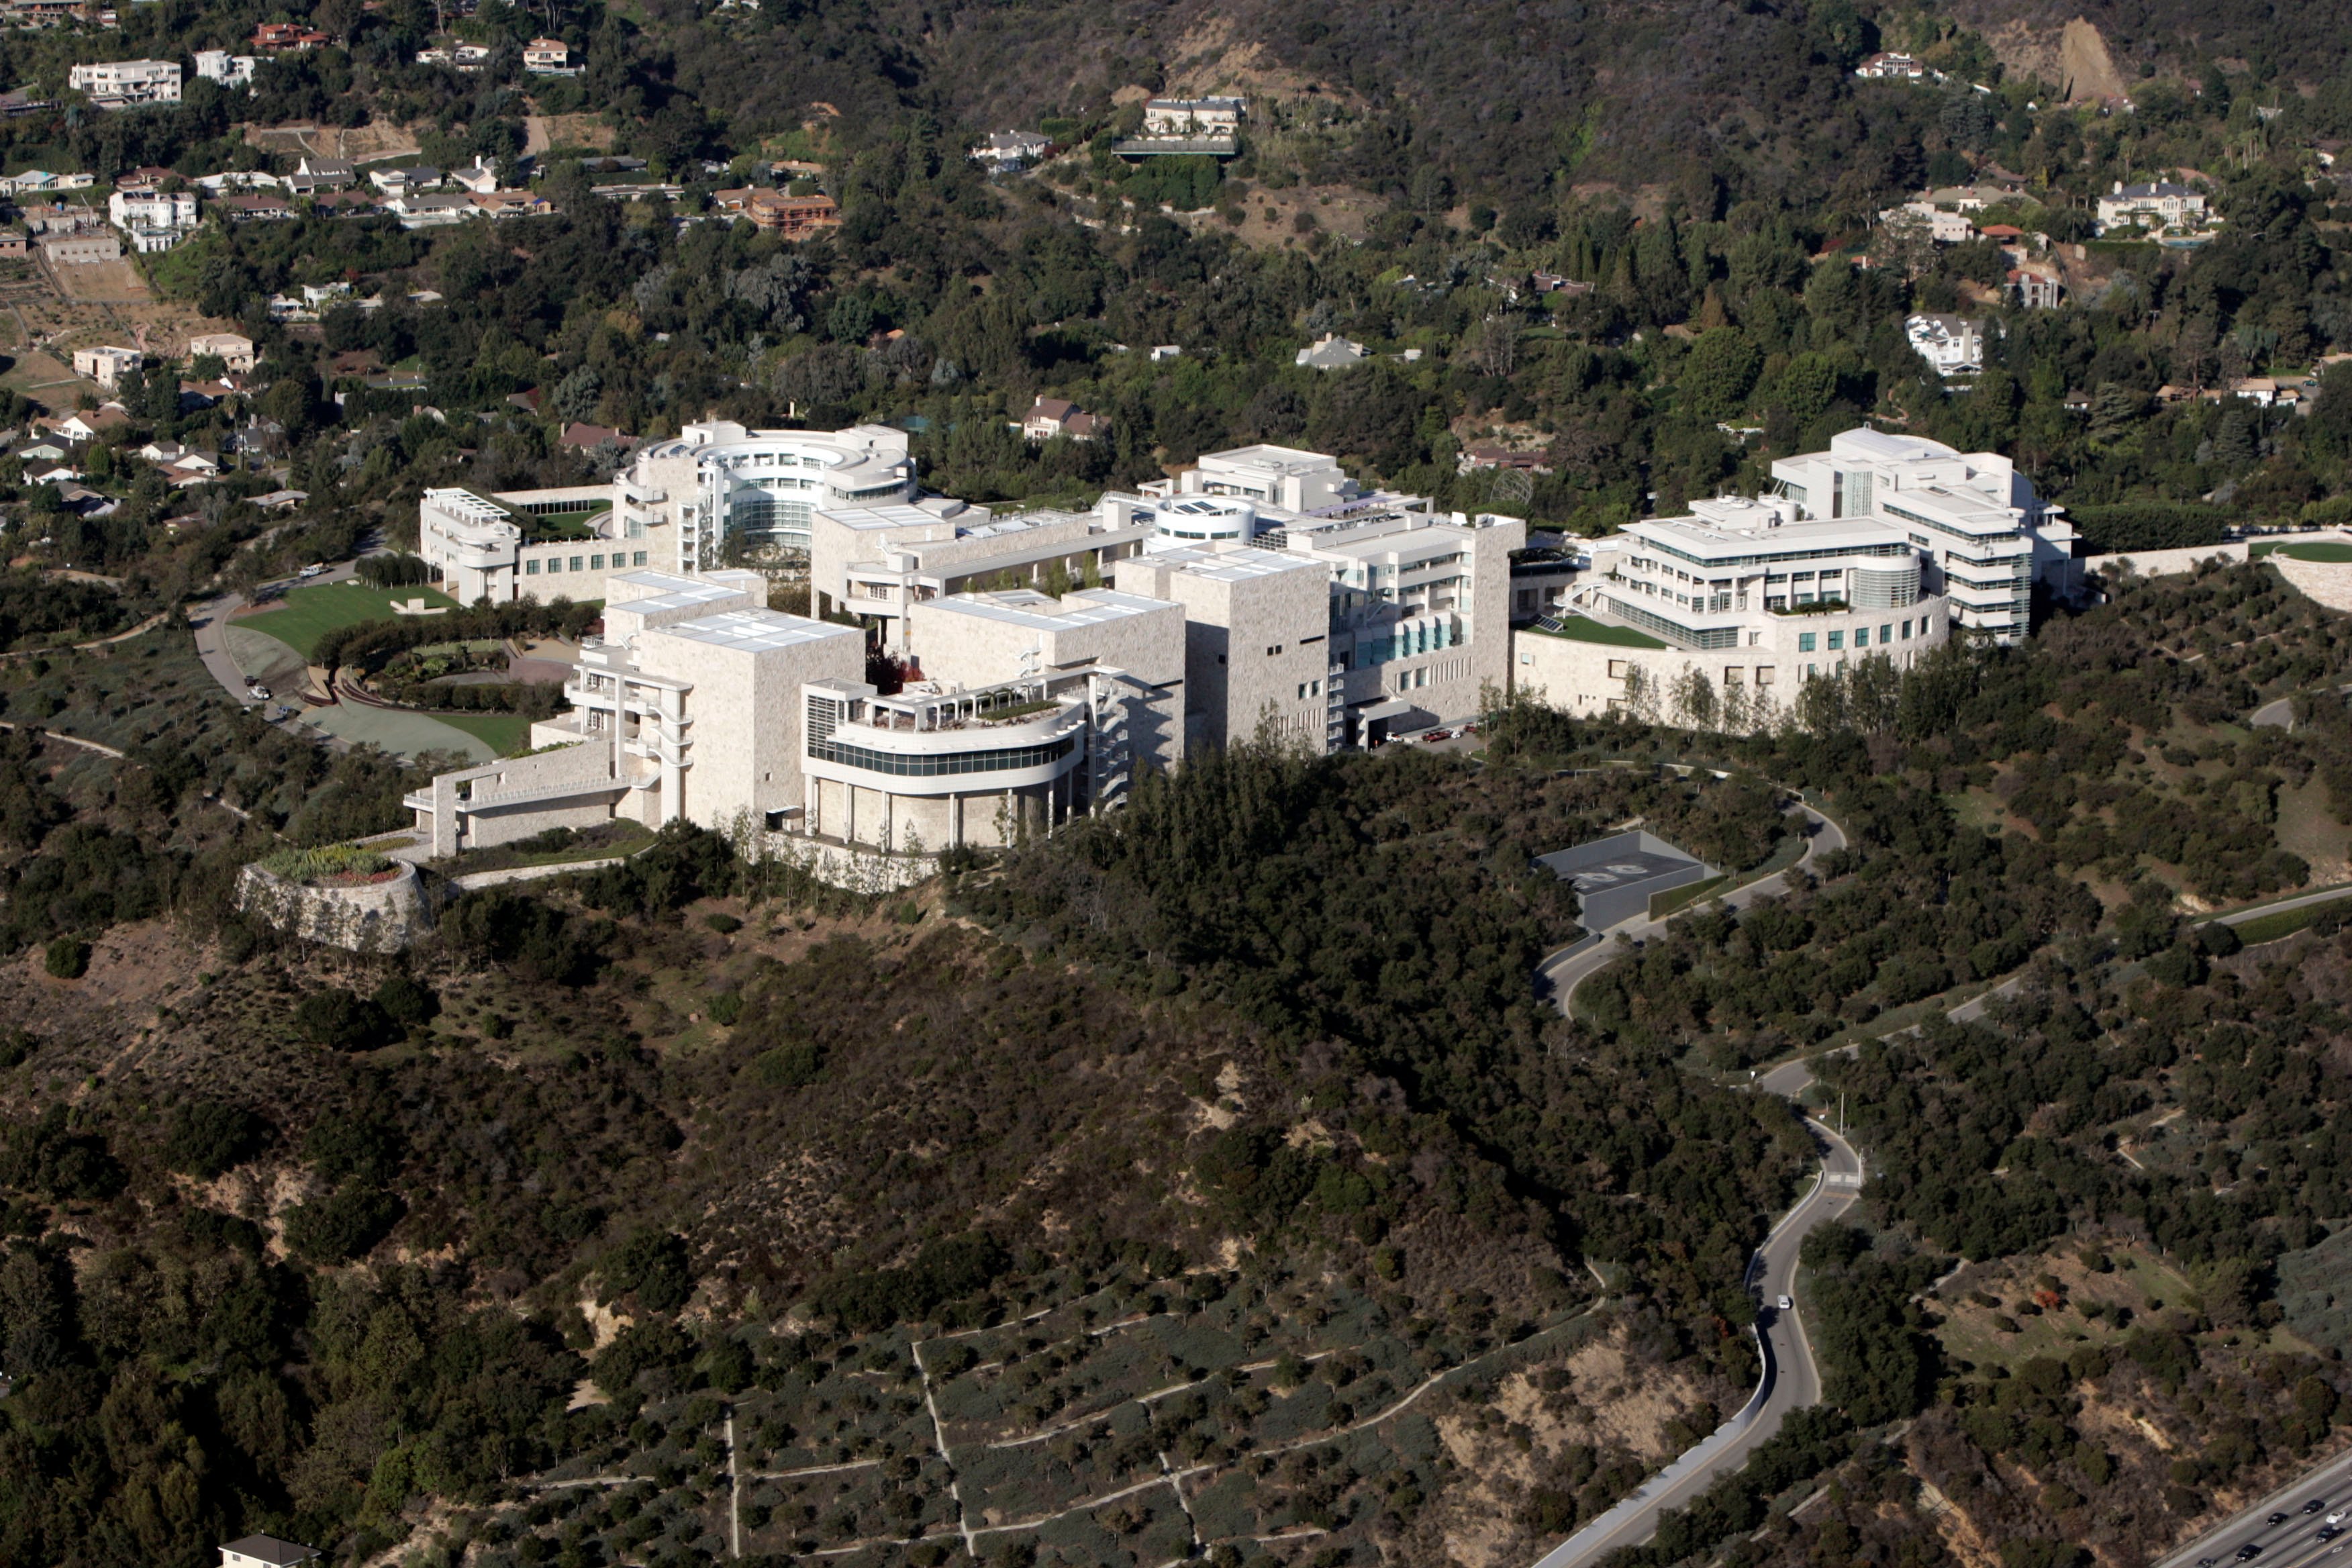 Getty Center | Museums in Westside, Los Angeles